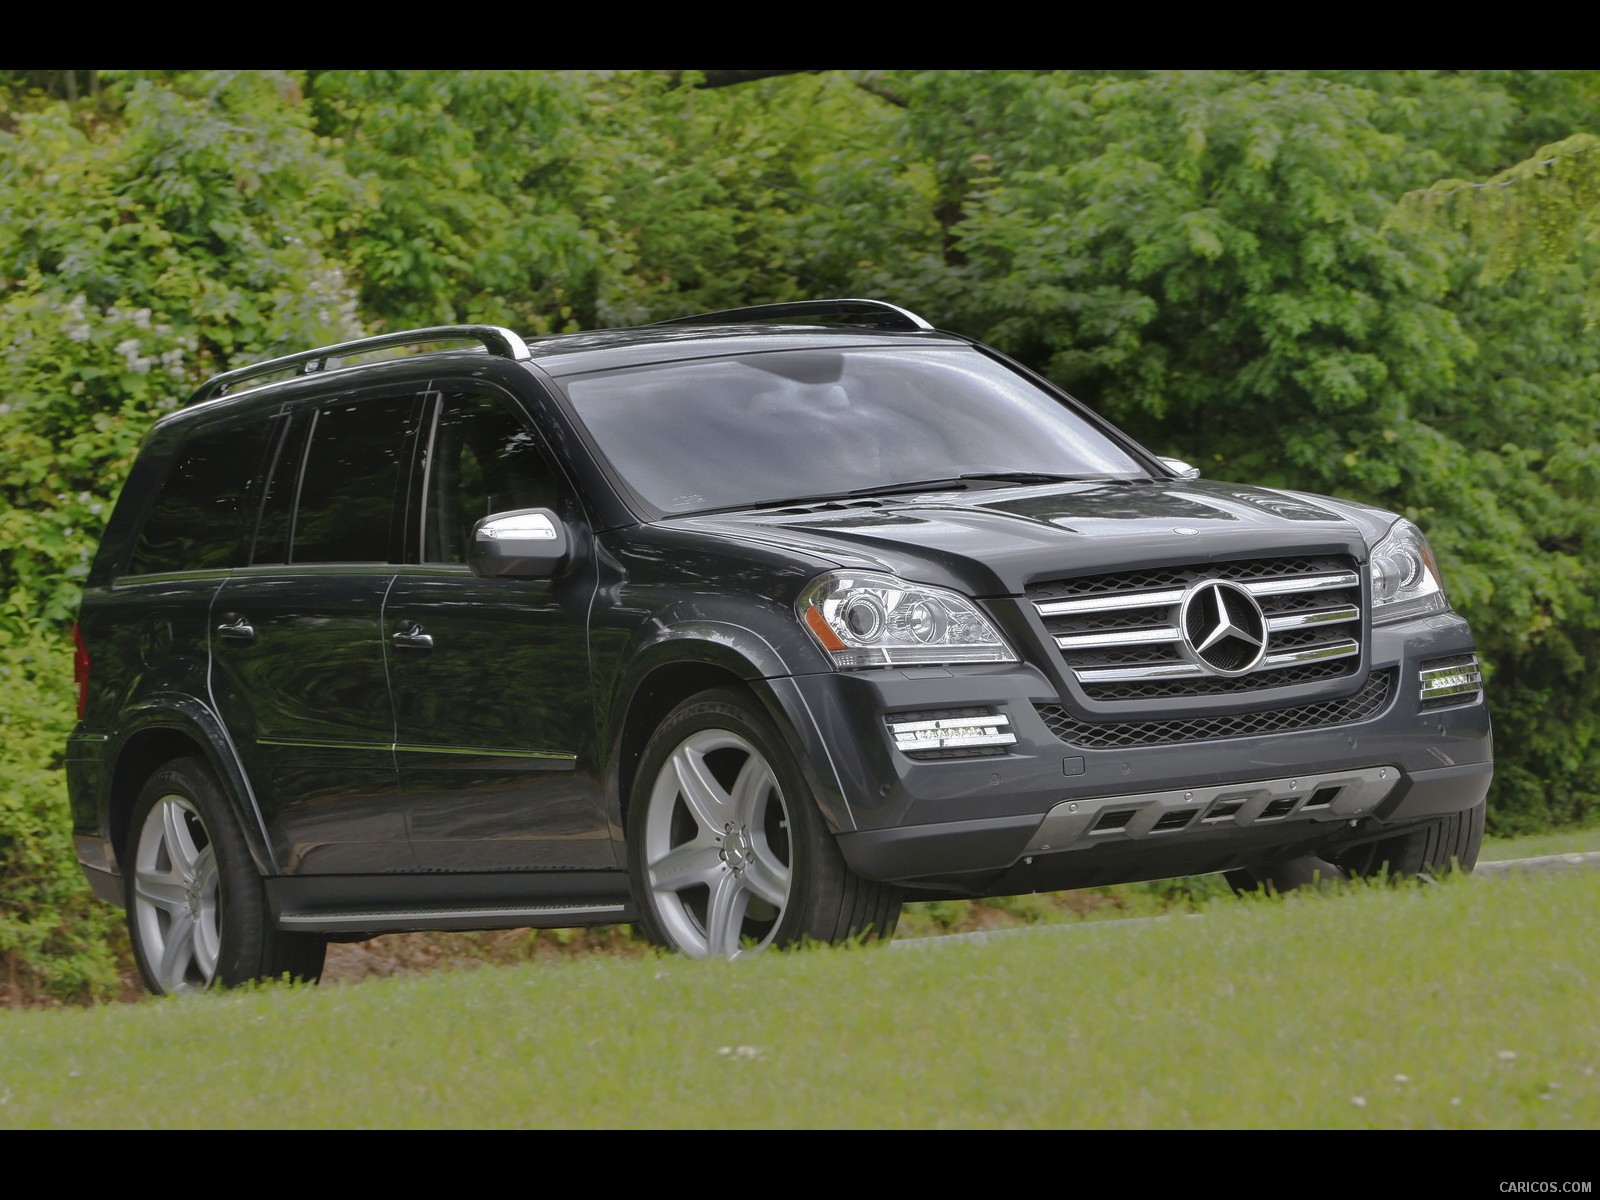 2010 Mercedes-Benz GL550 - Front, #45 of 112